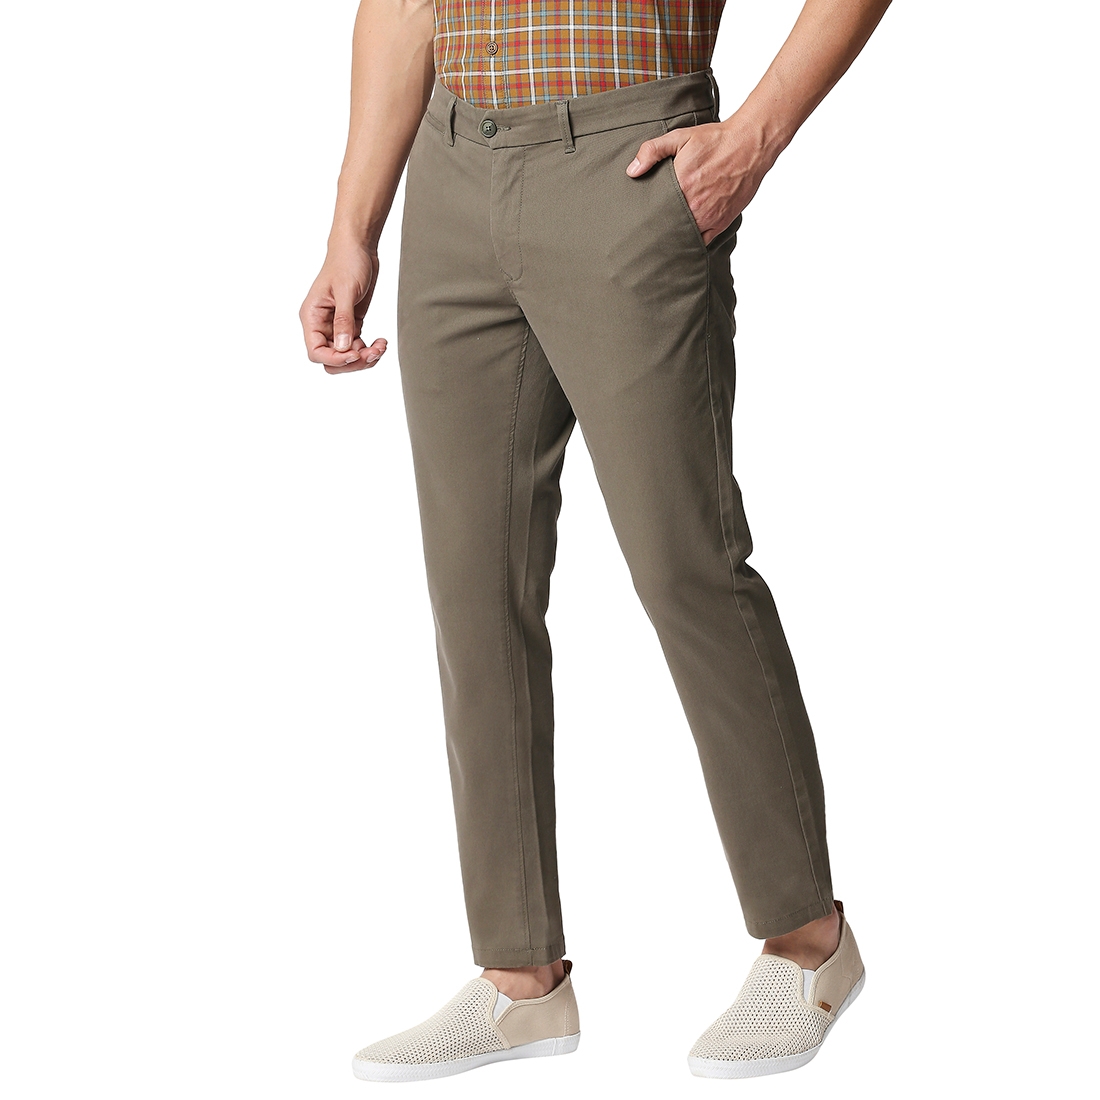 Basics | BASICS CASUAL PLAIN OLIVE COTTON STRETCH TAPERED TROUSERS  2